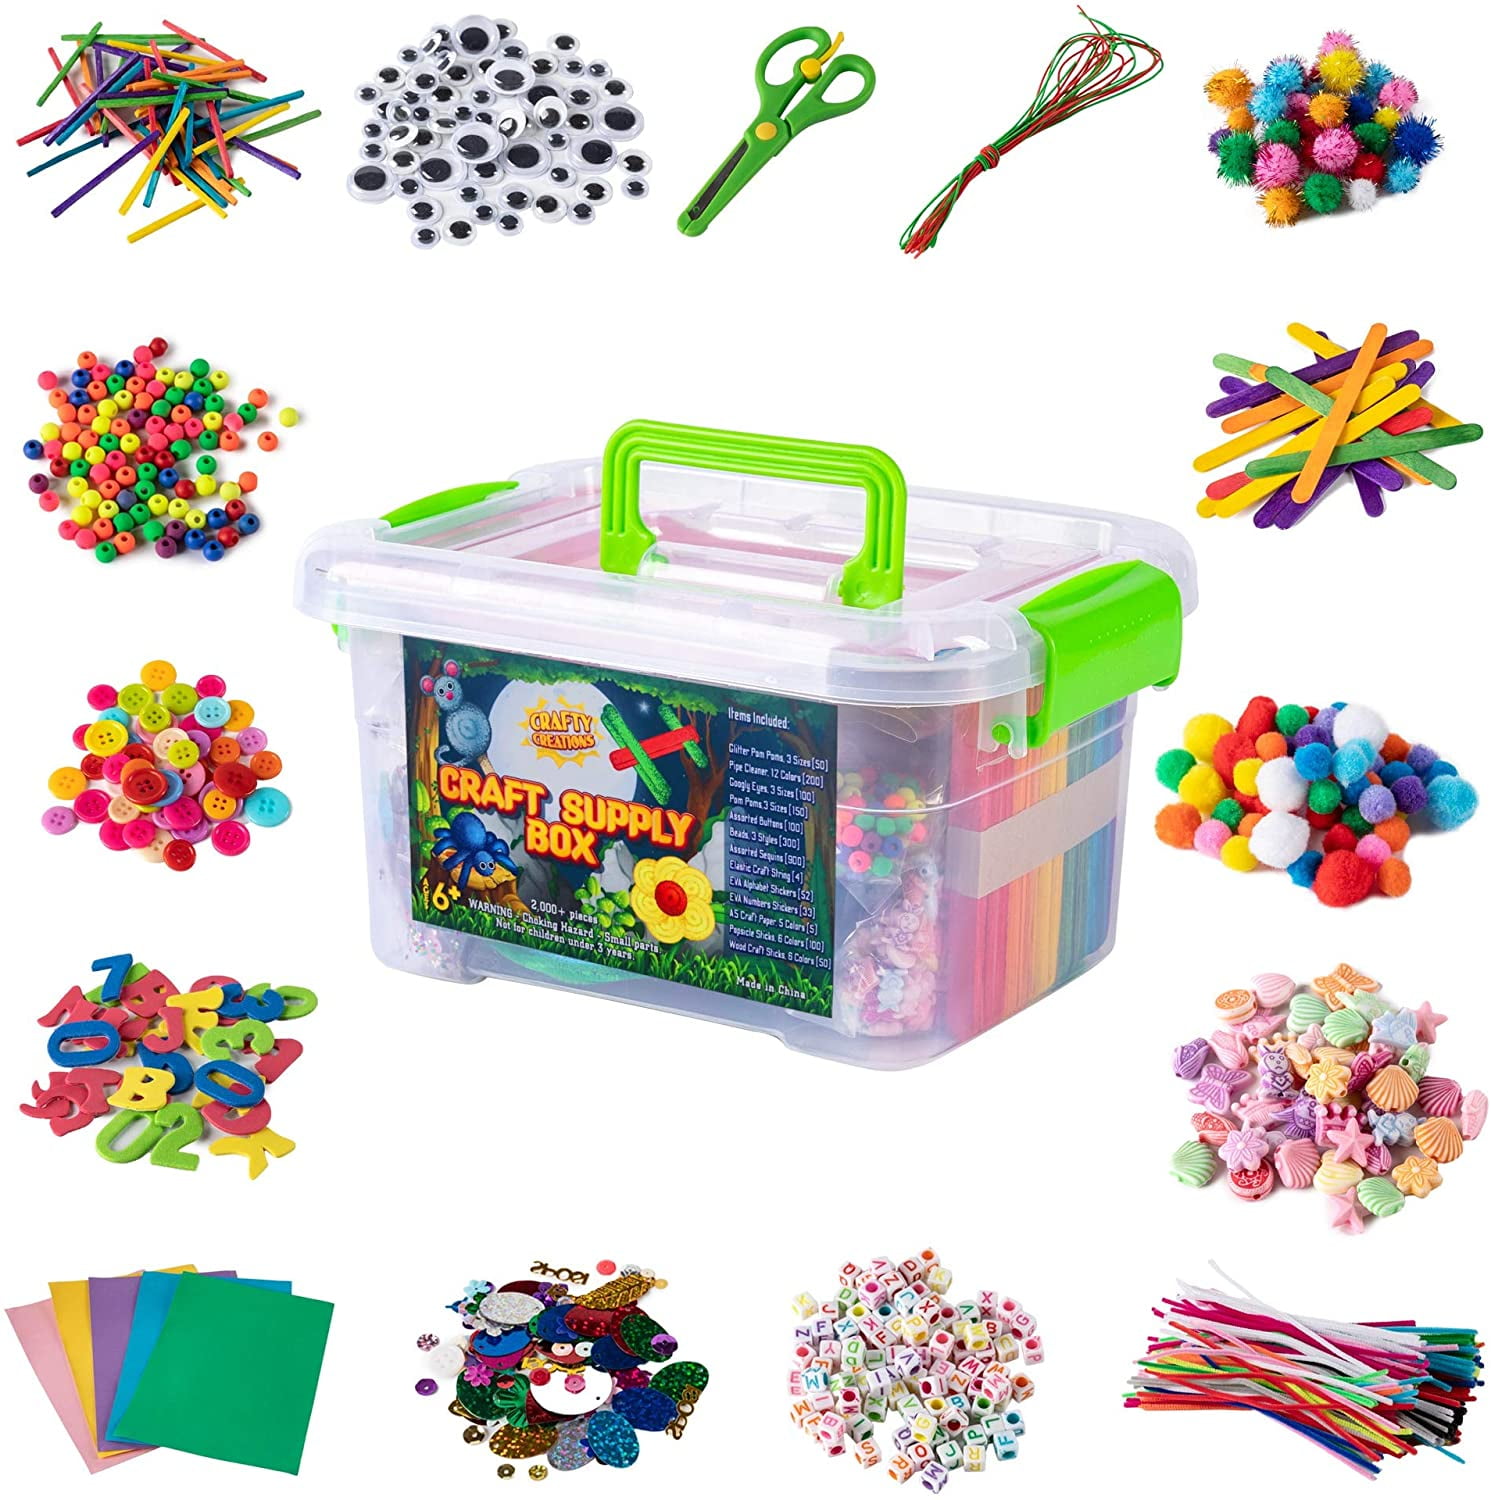 DEVELOPE BY PLAY 3 Layers Jumbo Arts and Crafts Supplies Warehouse, Big  Chest Box 17.91Wx12.4L Includes 1600+ Giant Craft Materials Kit for Kids  4-12